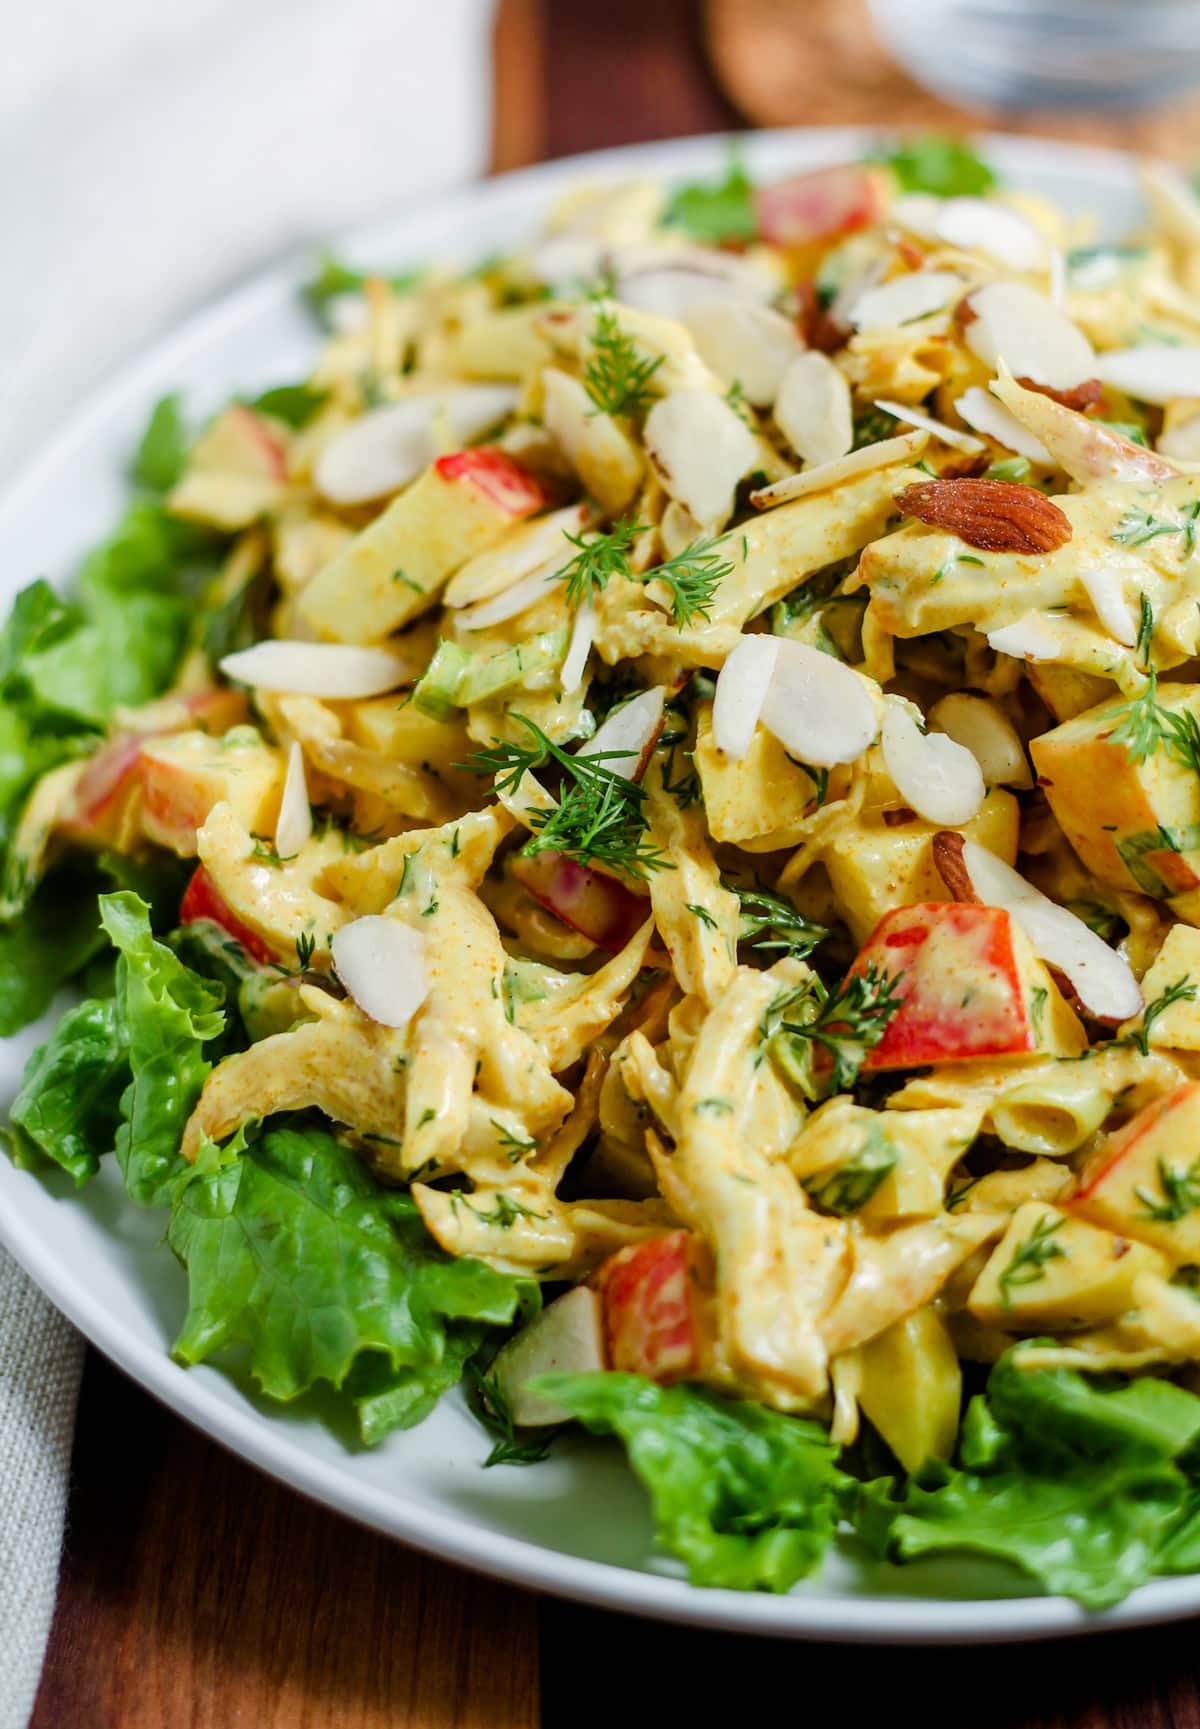 A curry chicken salad on a plate.